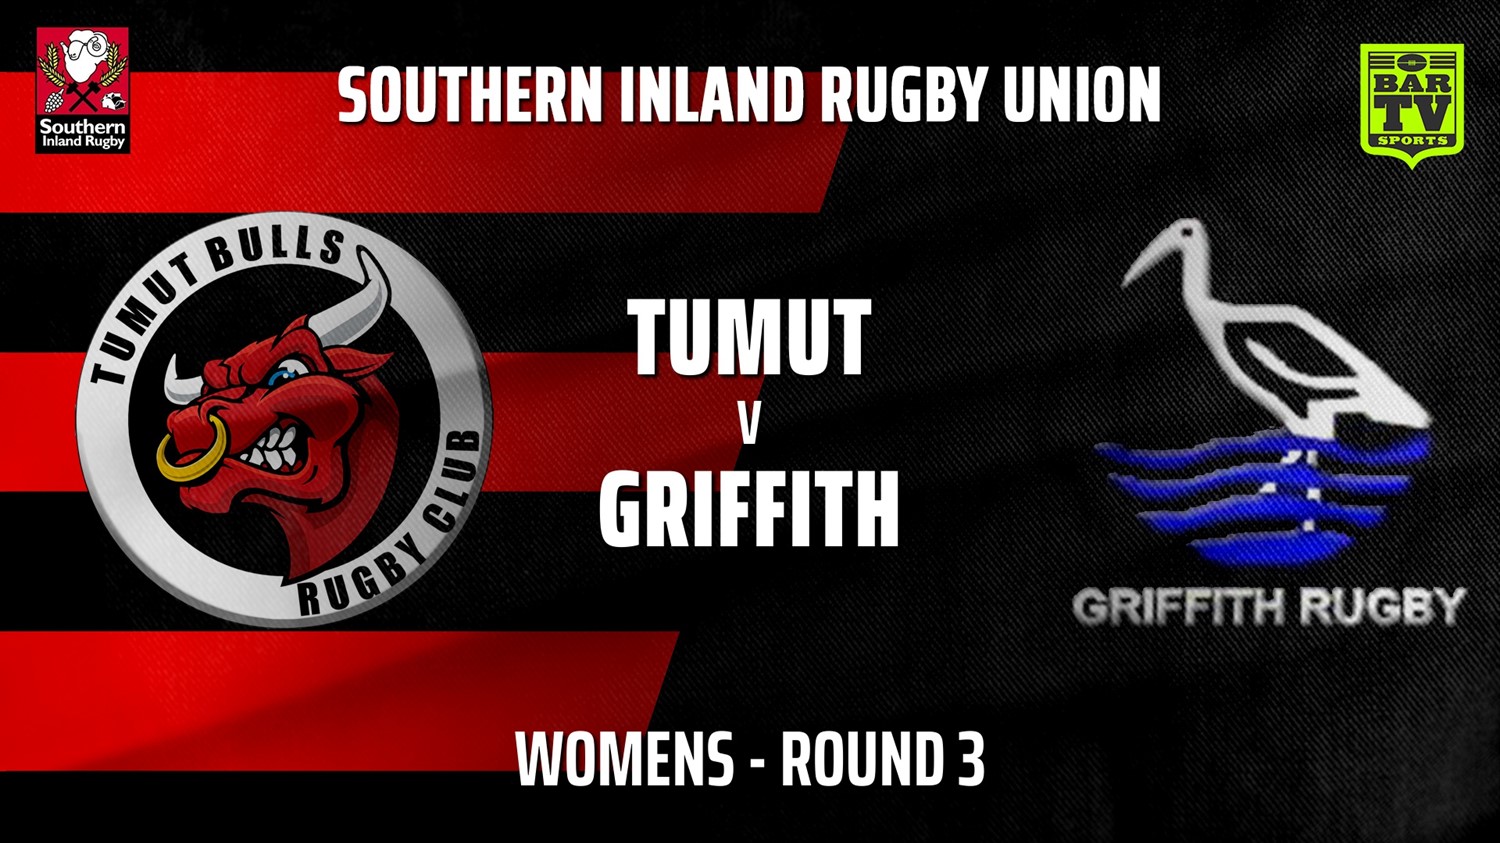 210422-Southern Inland Rugby Union Round 3 - Womens - Tumut Bulls v Griffith Slate Image